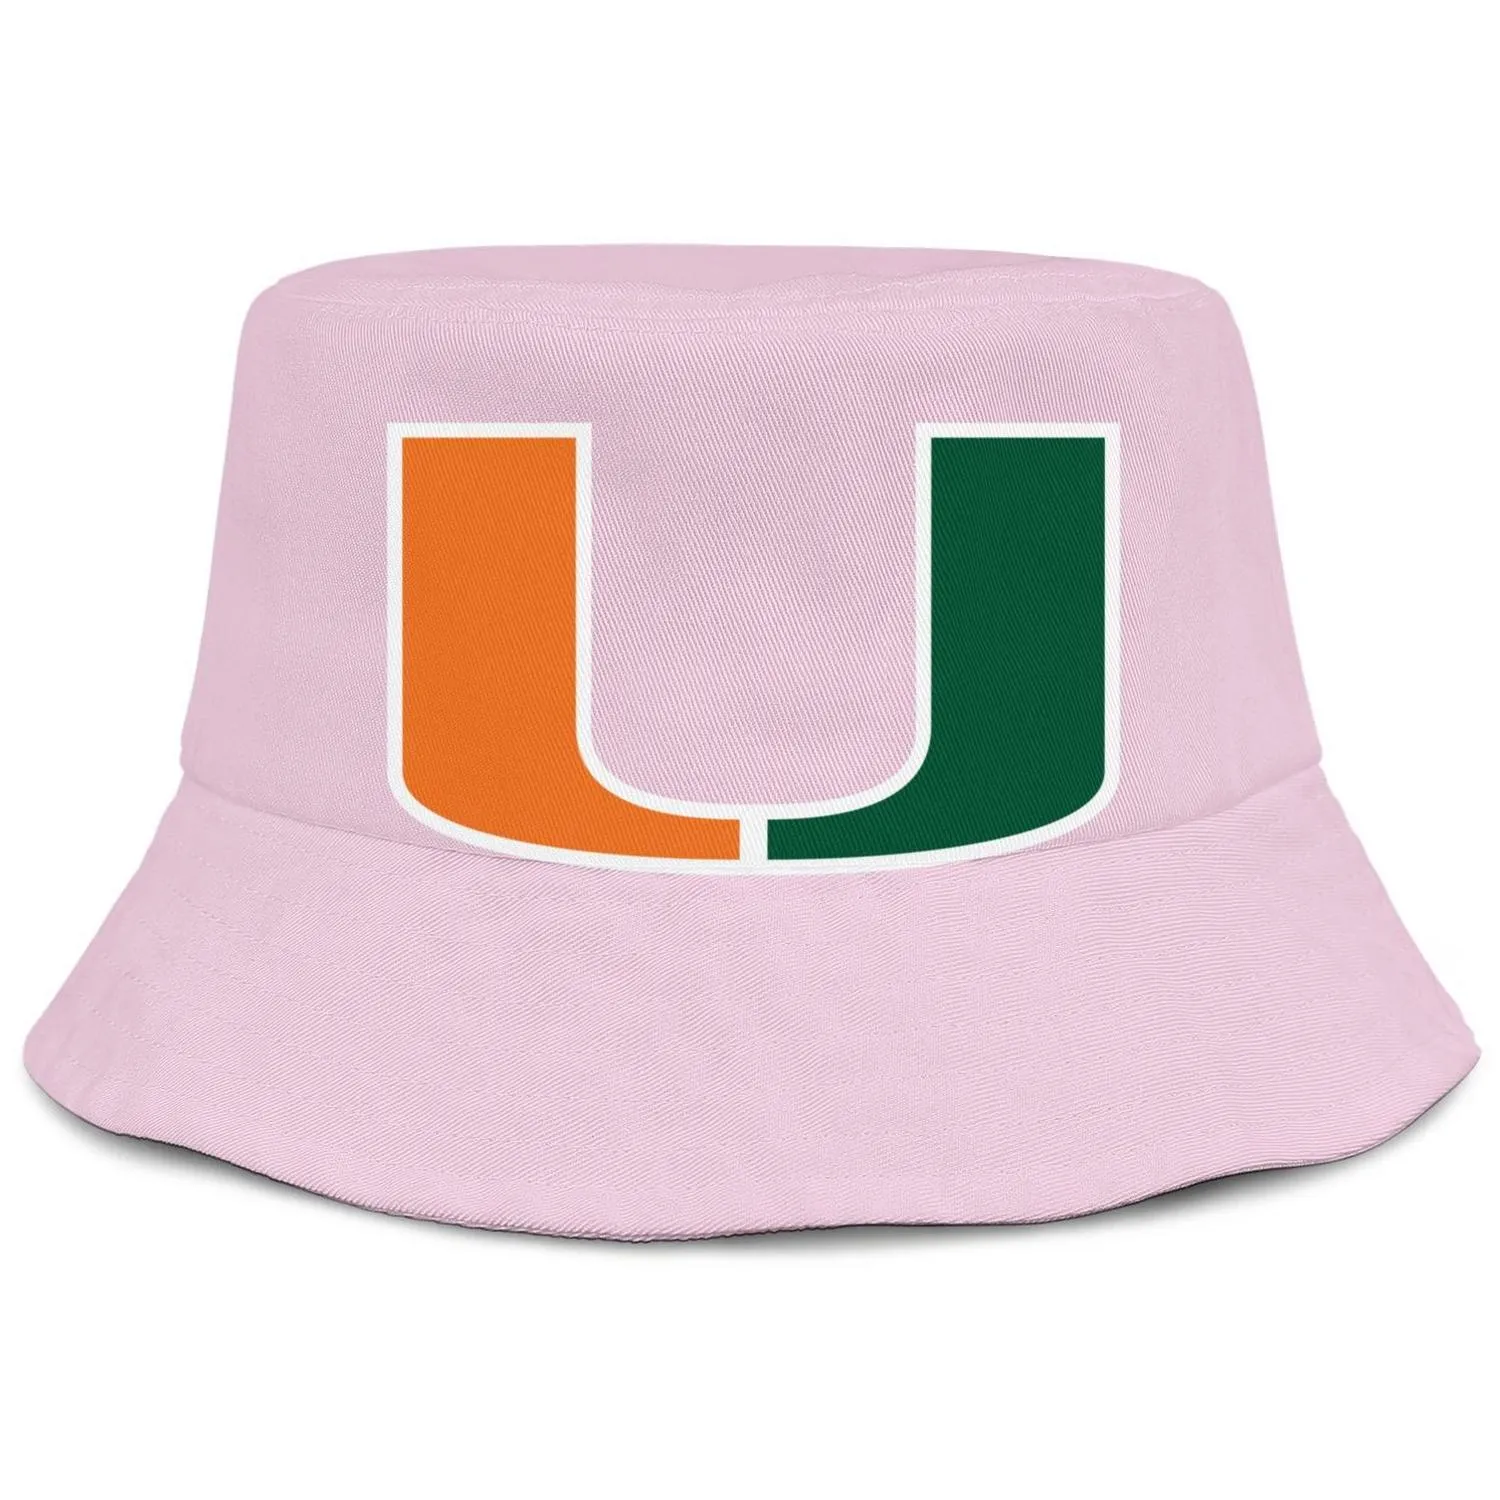 Miami Hurricanes Round Logo for men and women Pony hat cap design sports personalized trendy baseballhats football logo old Print 6967061